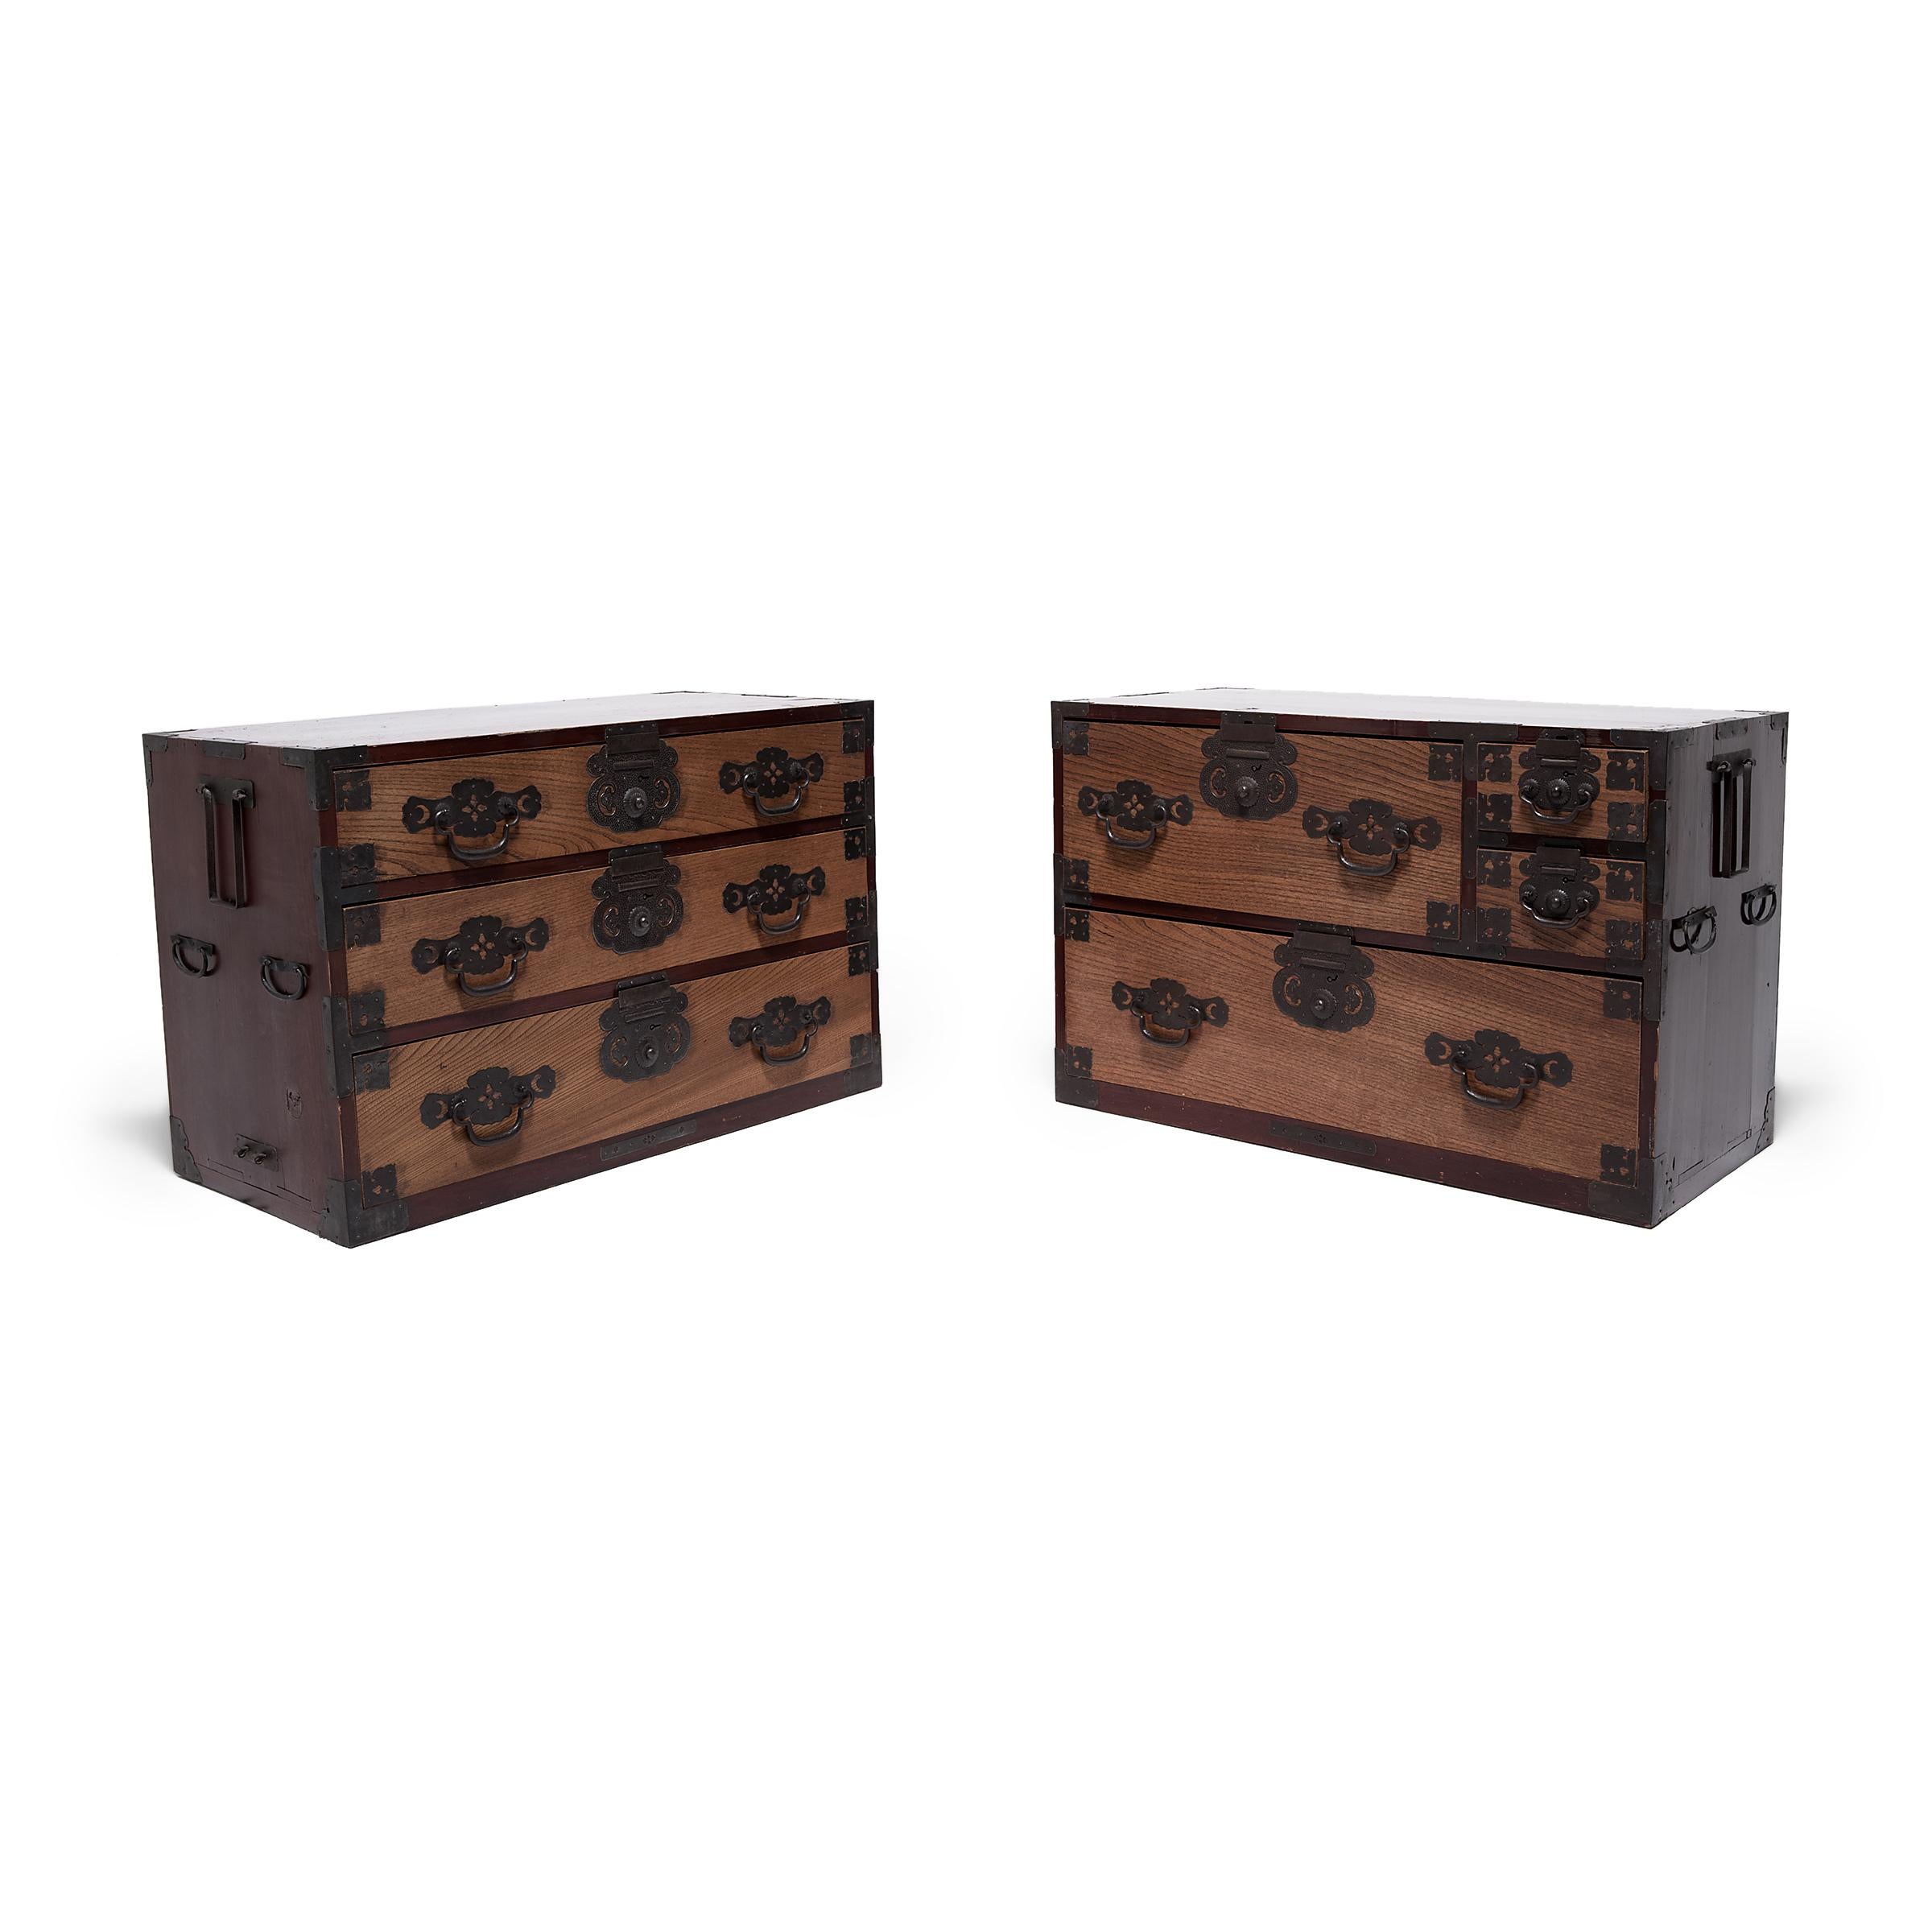 Designed to be versatile and portable, Japanese tansu chests were multipurpose storage cabinets that moved throughout the home as needed. Dated to the late 19th century, this Meiji-era example is a lacquered chest-on-chest clothing tansu (isho